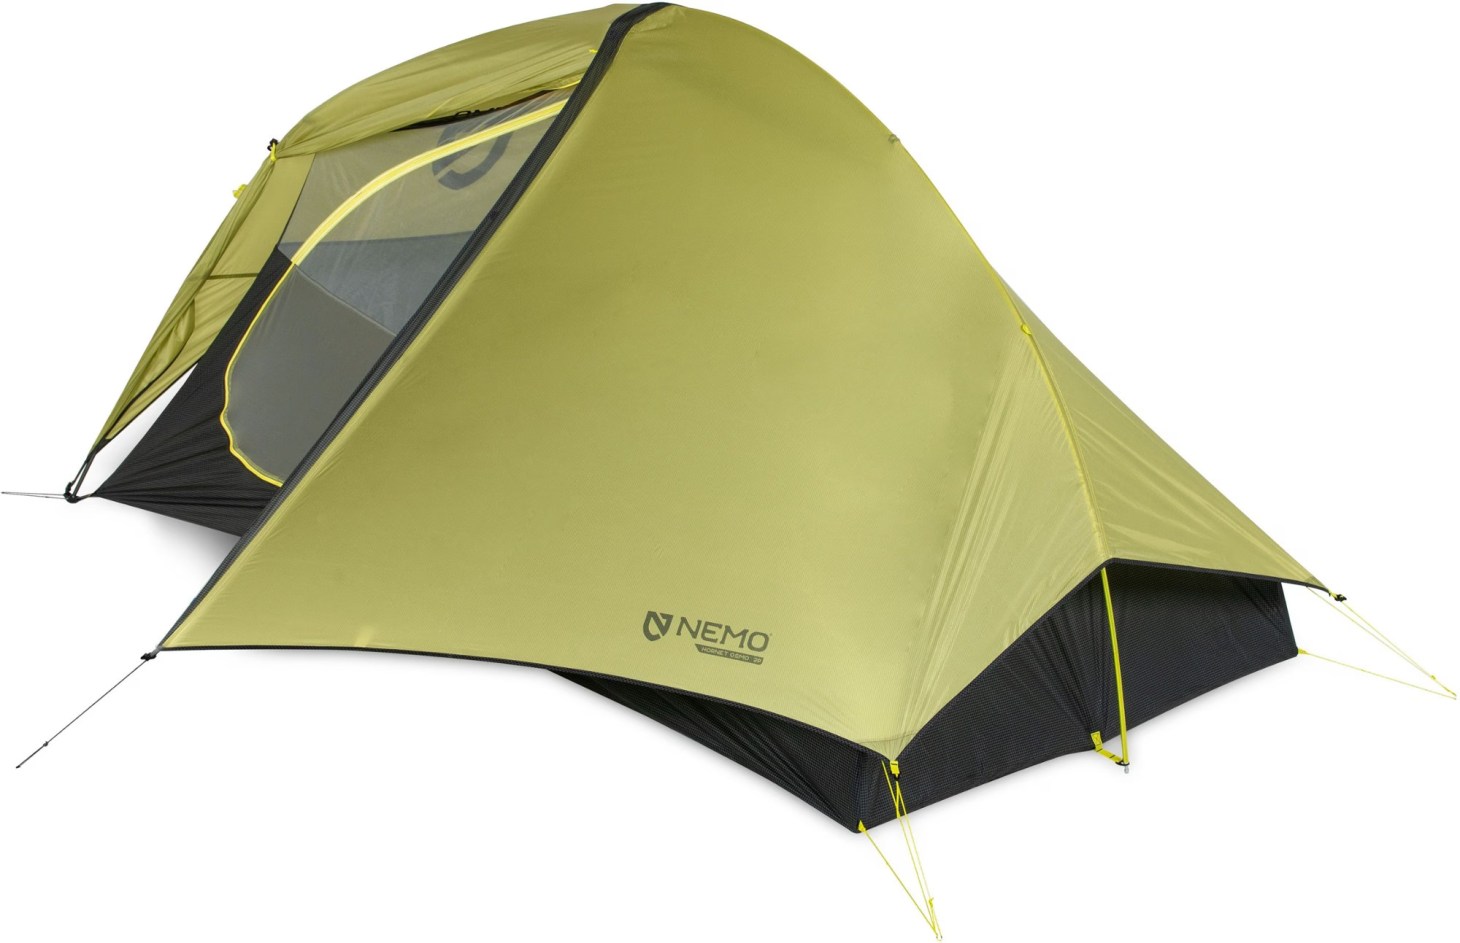 nemo backpacking tent, one of the best things you can buy from REI